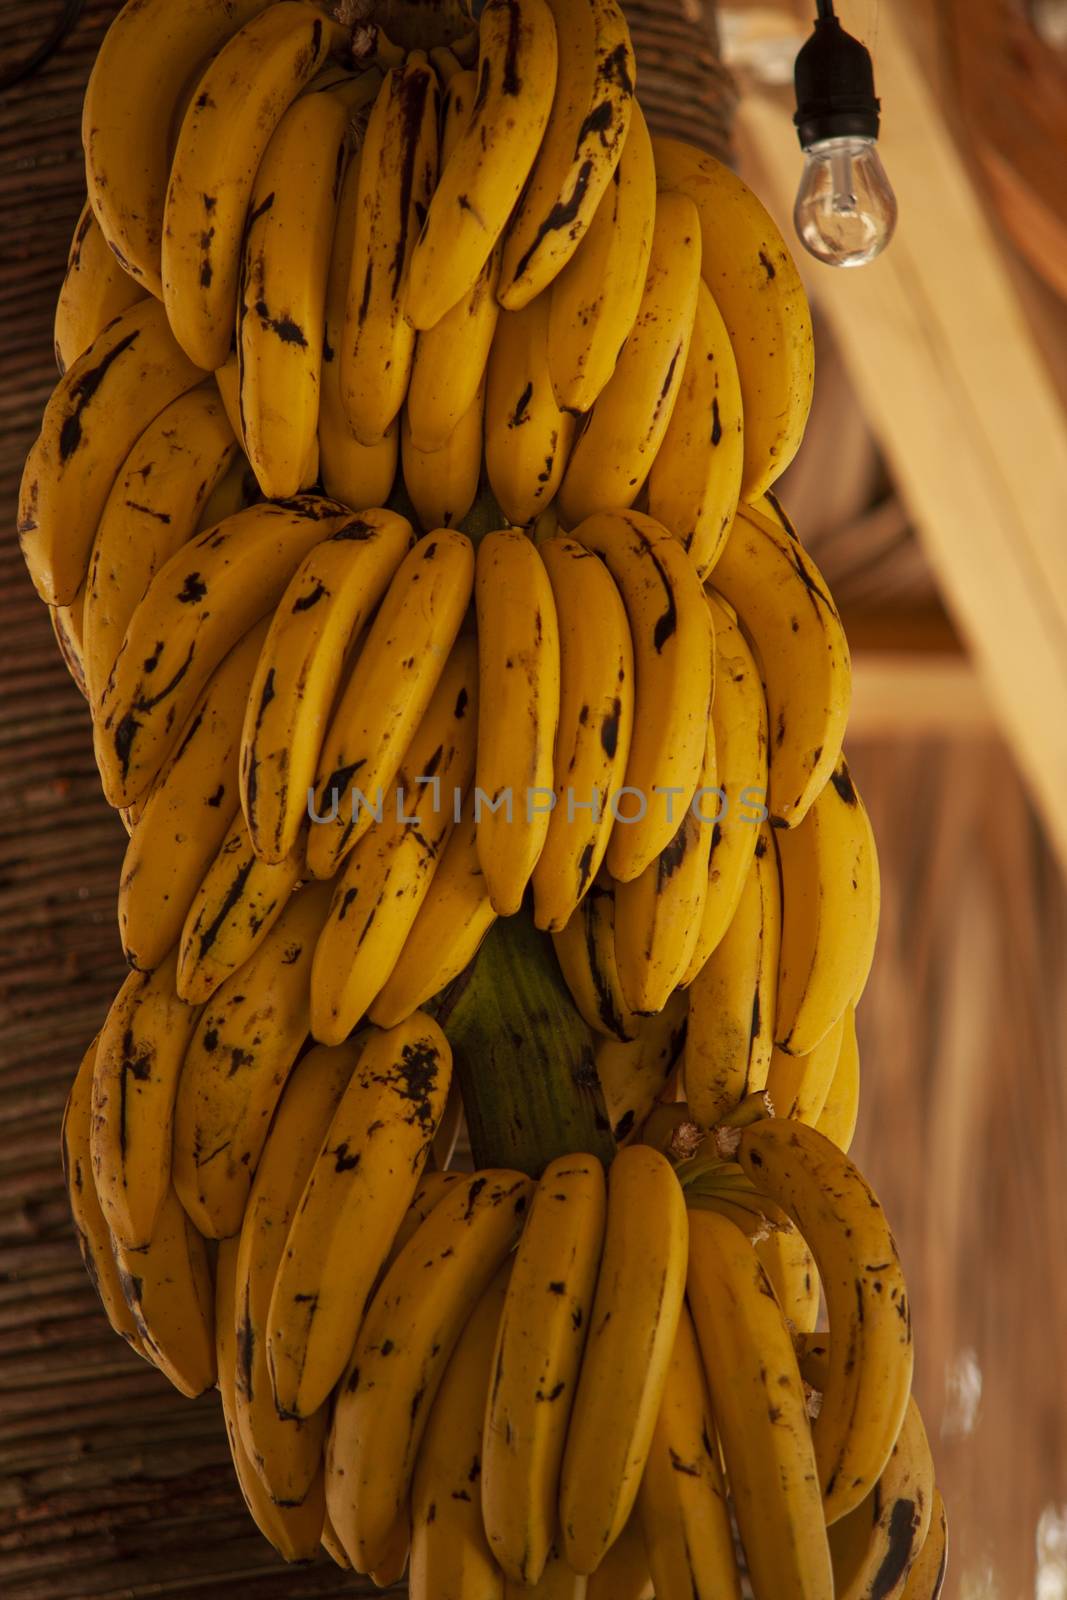 Wicker of bananas ready to eat in caraibic bar